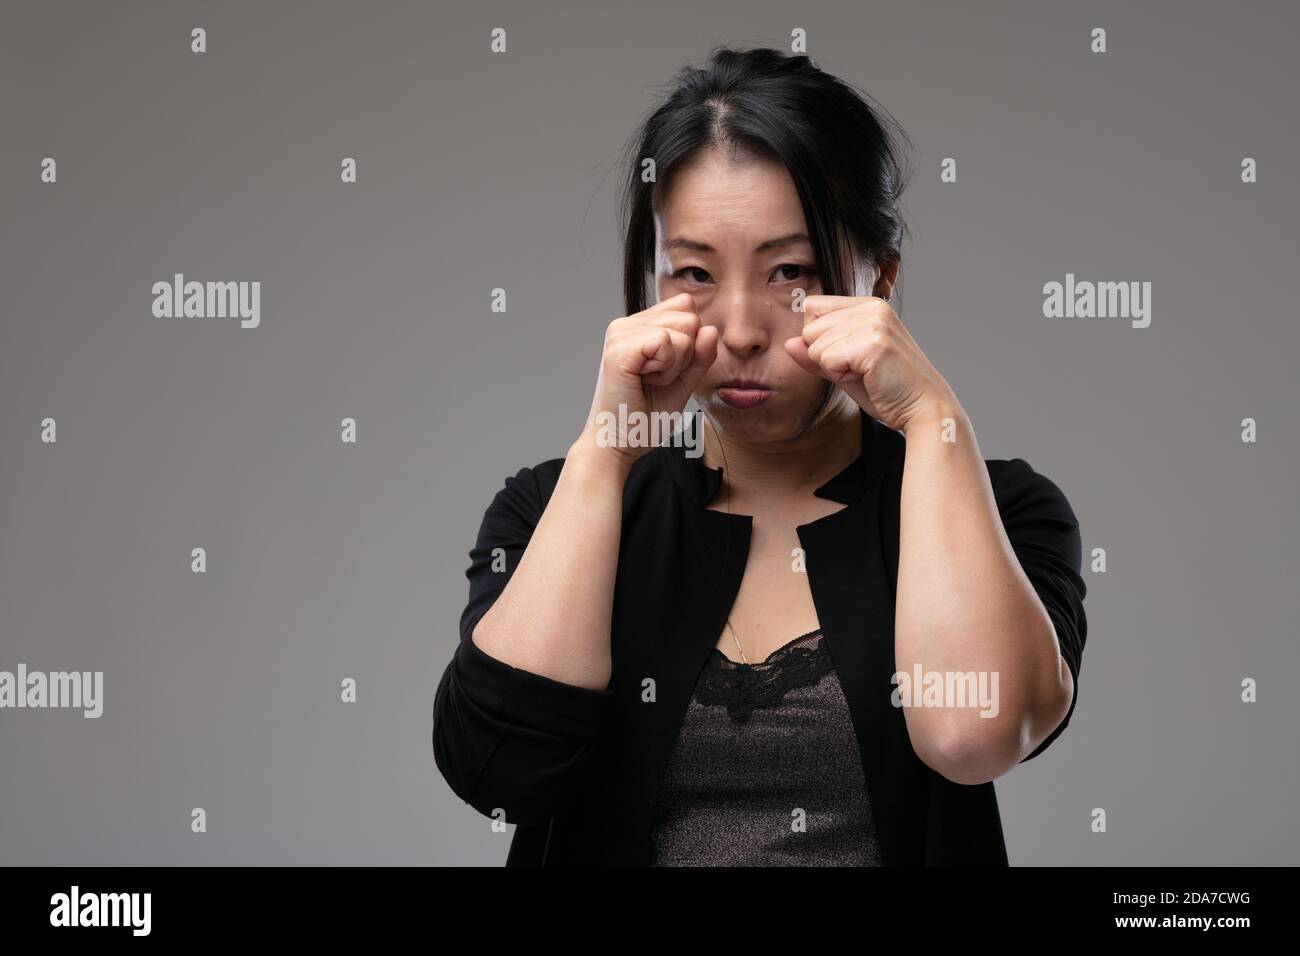 Upset morose Asian woman standing crying raising her hands to her eyes in sorrow over a grey studio background with copyspace Stock Photo